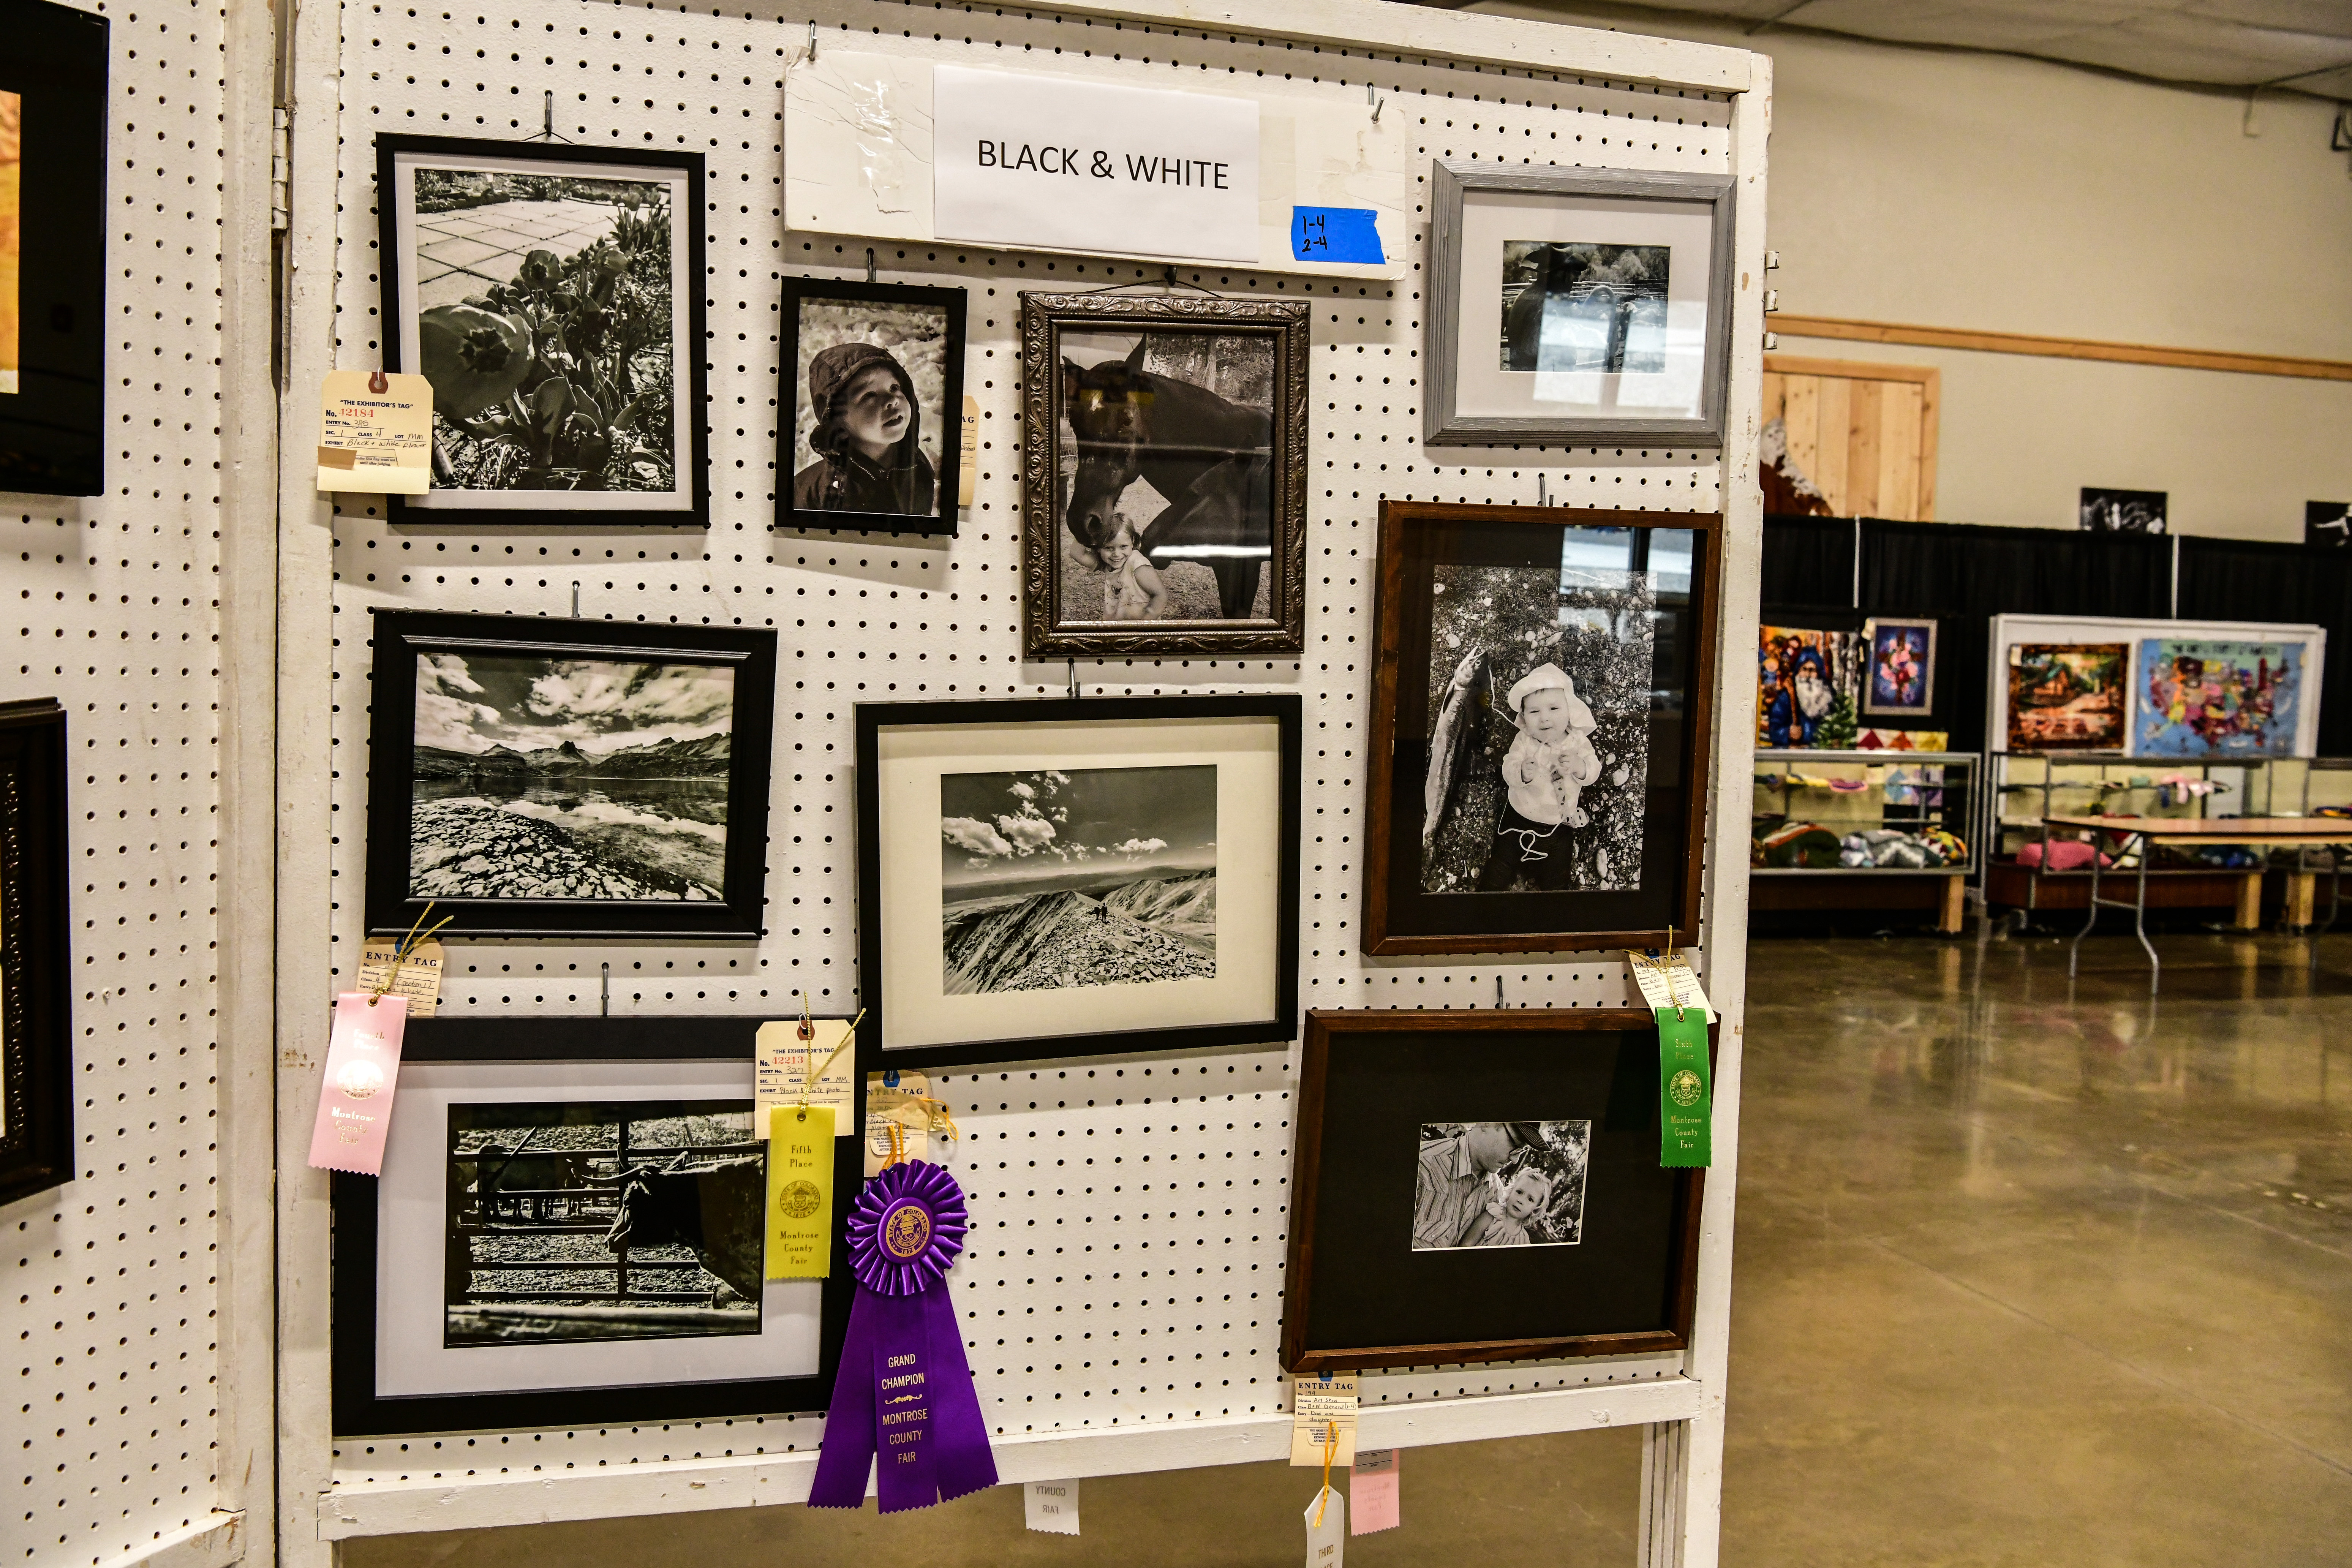 Photos hung during fair and rodeo in the banquet hall